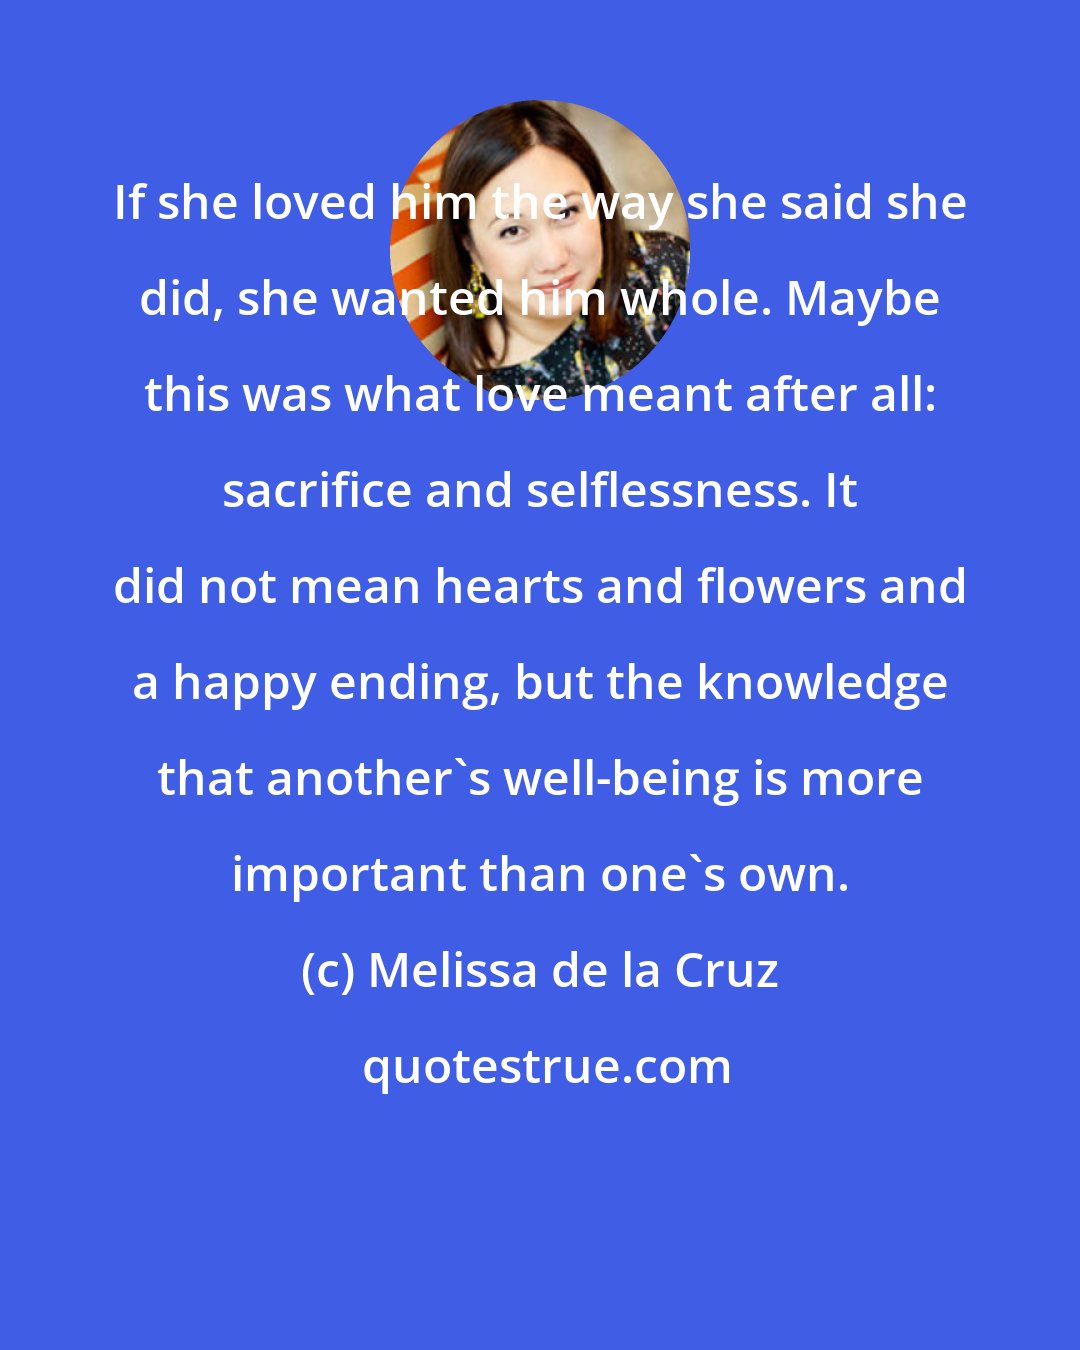 Melissa de la Cruz: If she loved him the way she said she did, she wanted him whole. Maybe this was what love meant after all: sacrifice and selflessness. It did not mean hearts and flowers and a happy ending, but the knowledge that another's well-being is more important than one's own.